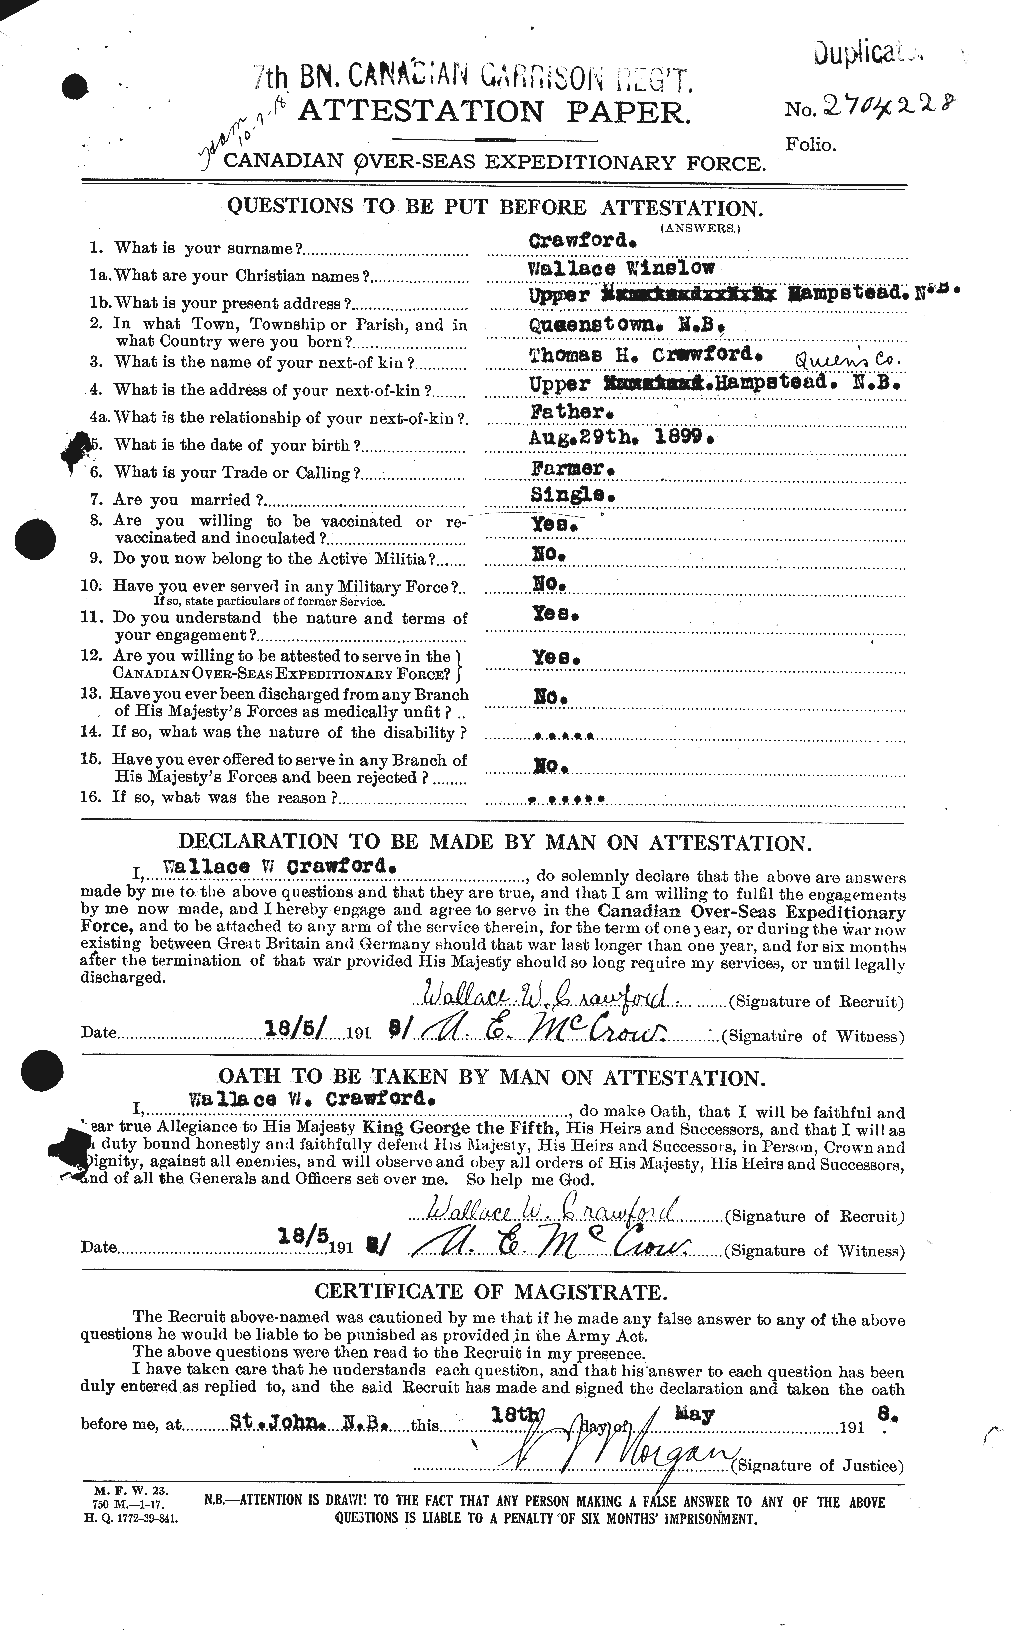 Personnel Records of the First World War - CEF 061178a